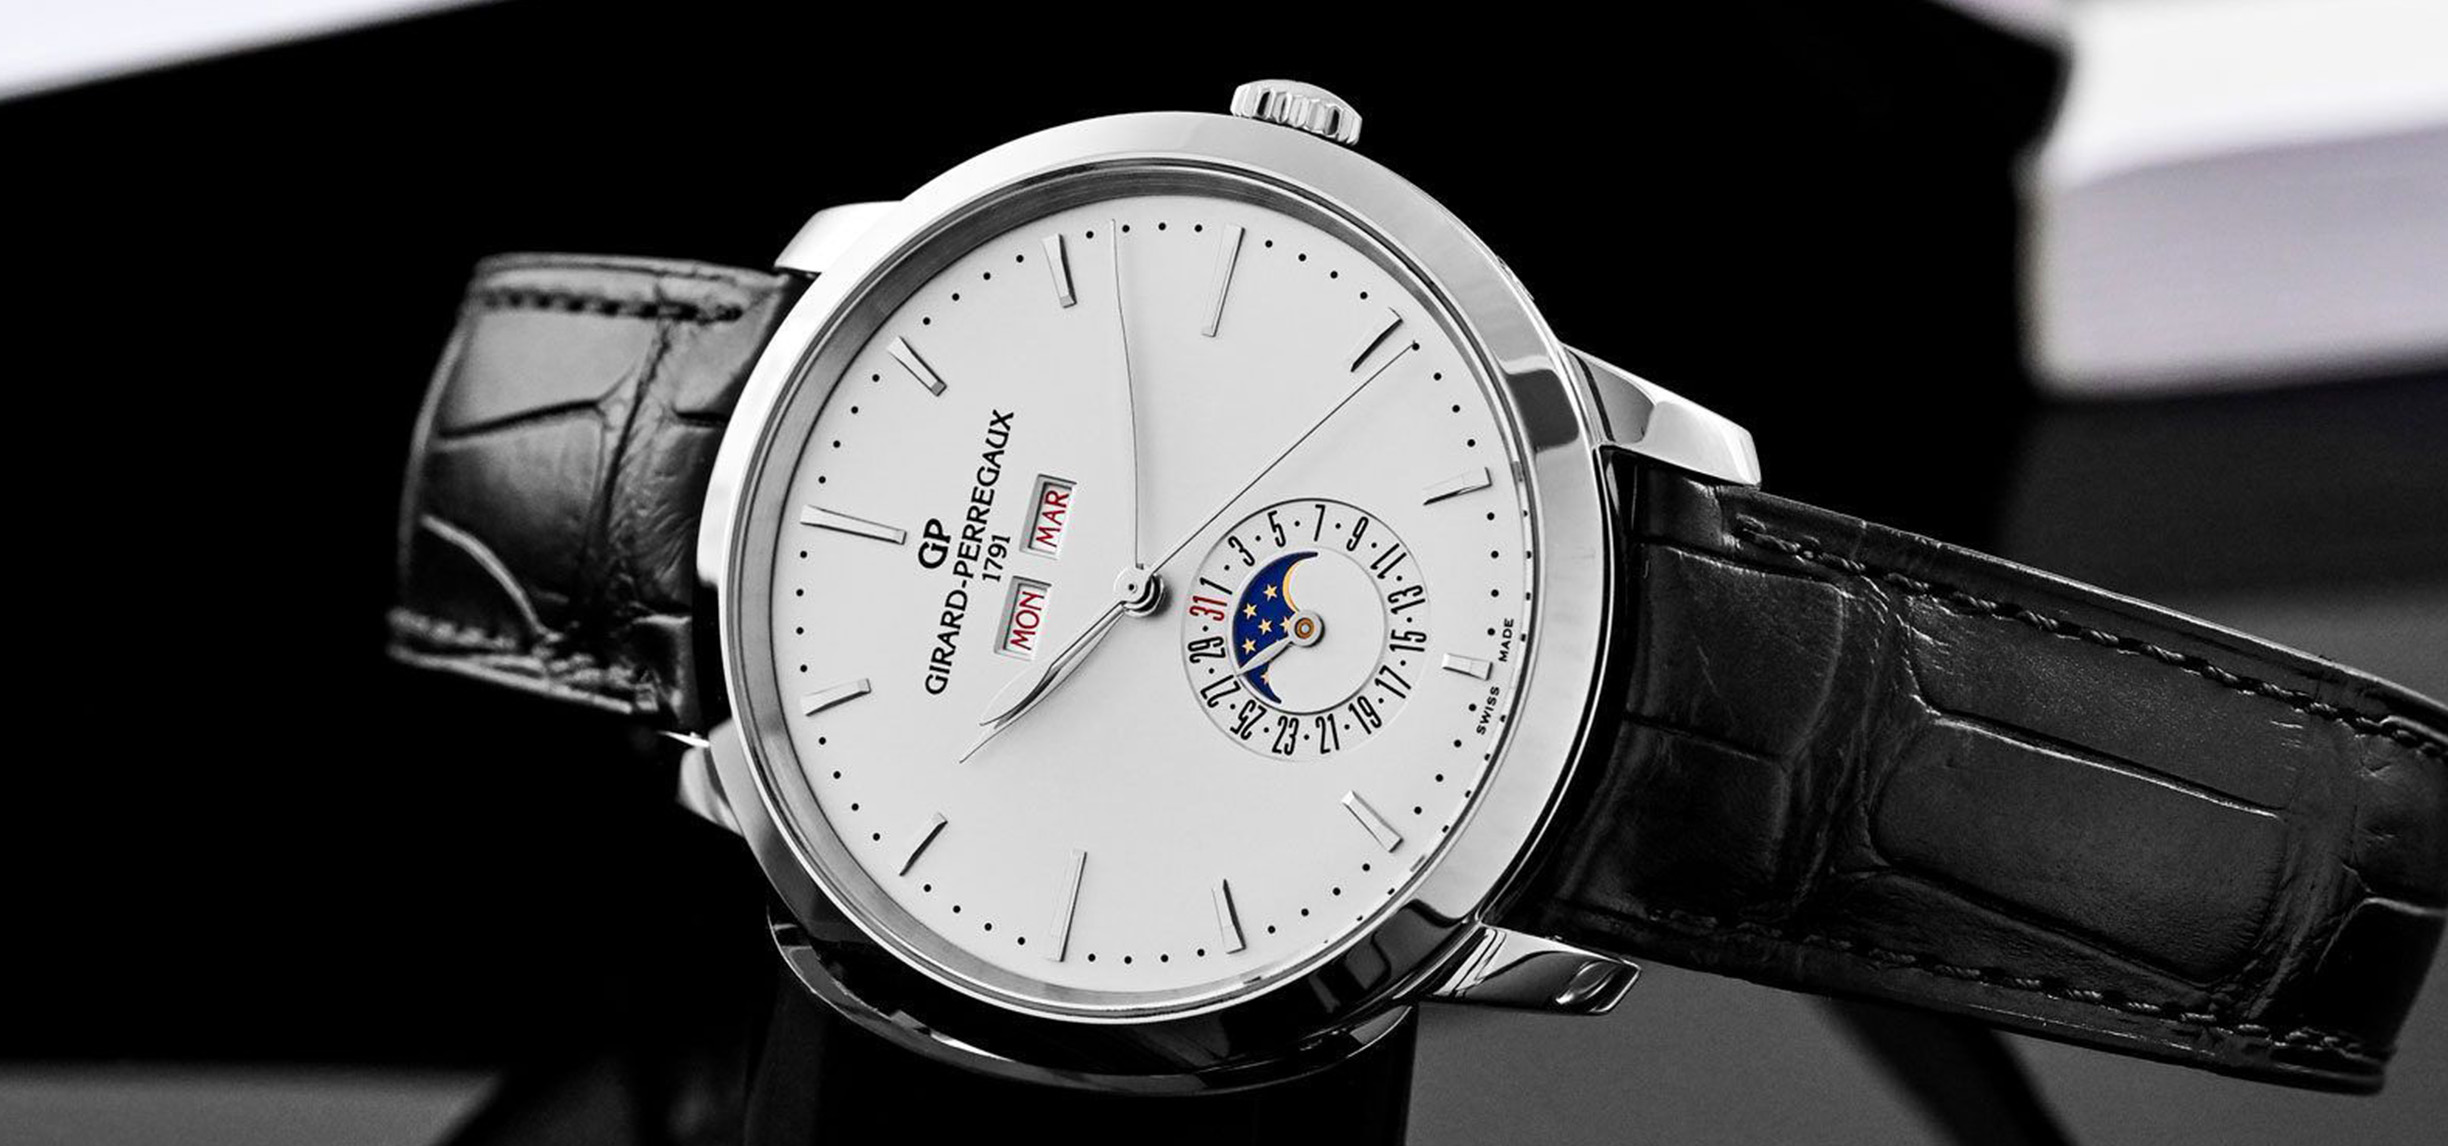 Strapping Elegance To The Wrist: Presenting The Girard-Perregaux 1966 Full Calendar